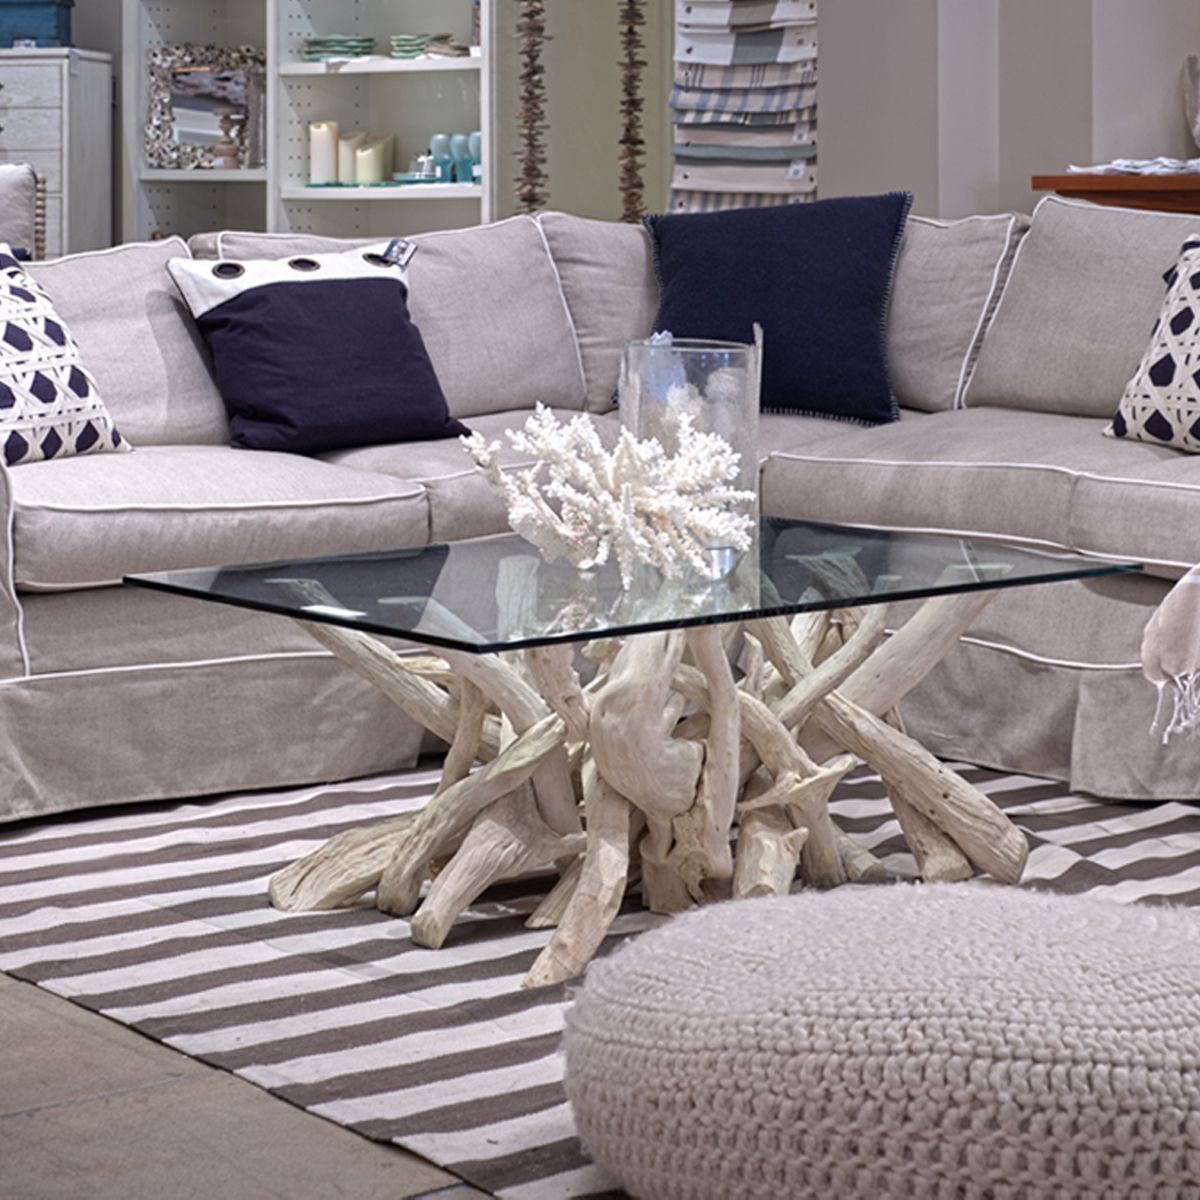 Glass Coffee Tables For Small Spaces Furniture Small Spaces Living Room Design With Square Glass Top Crate And Barrel Driftwood Coffee (View 4 of 10)